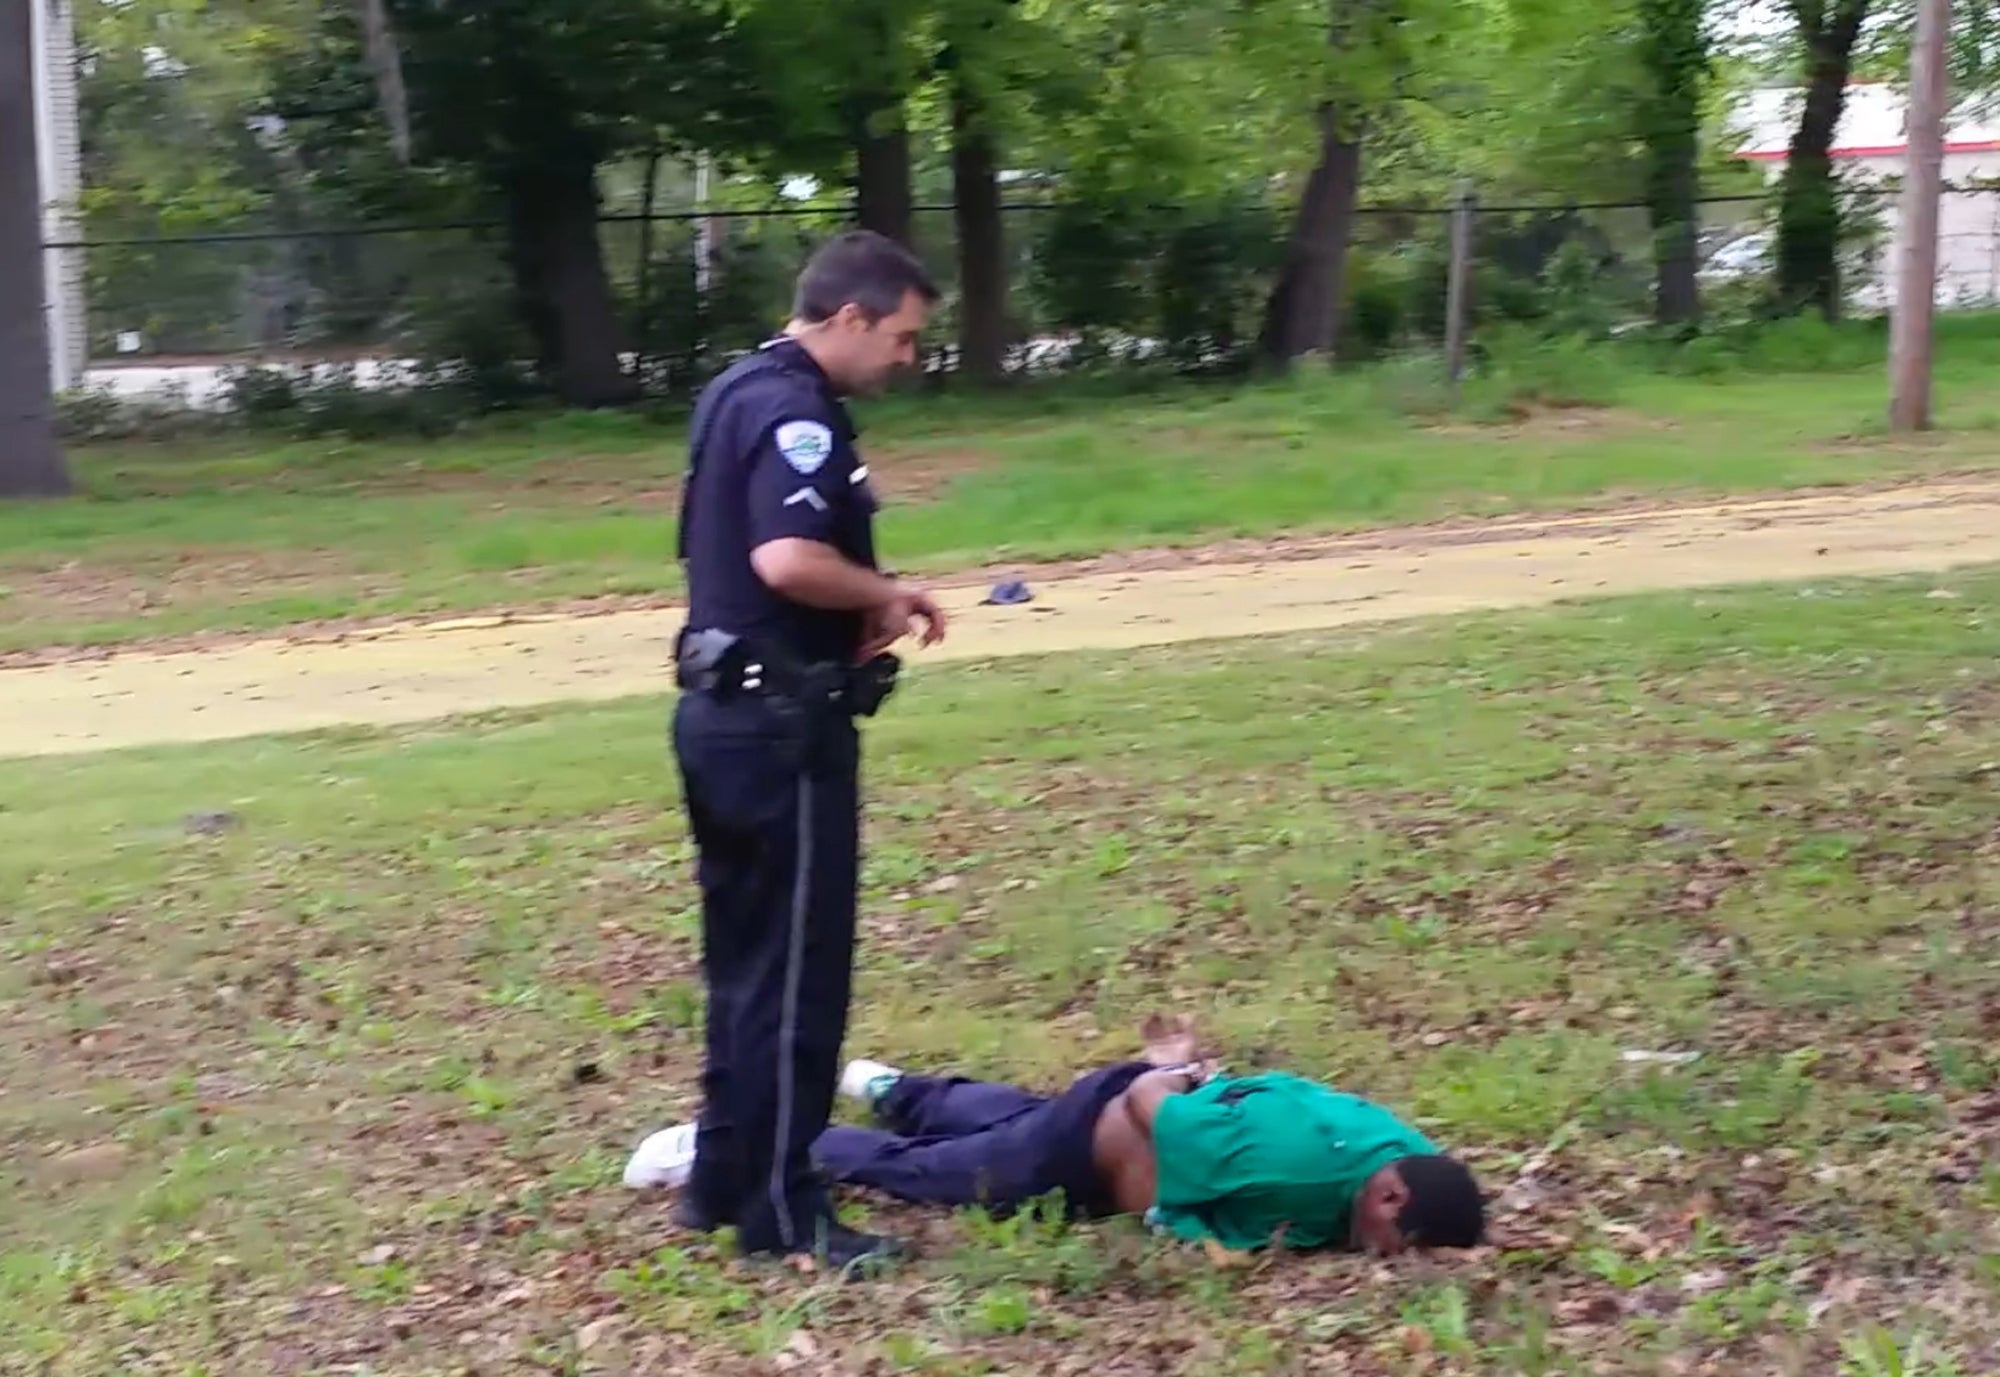 Caught On Tape: 10 Times Police Brutality Was Caught On Video